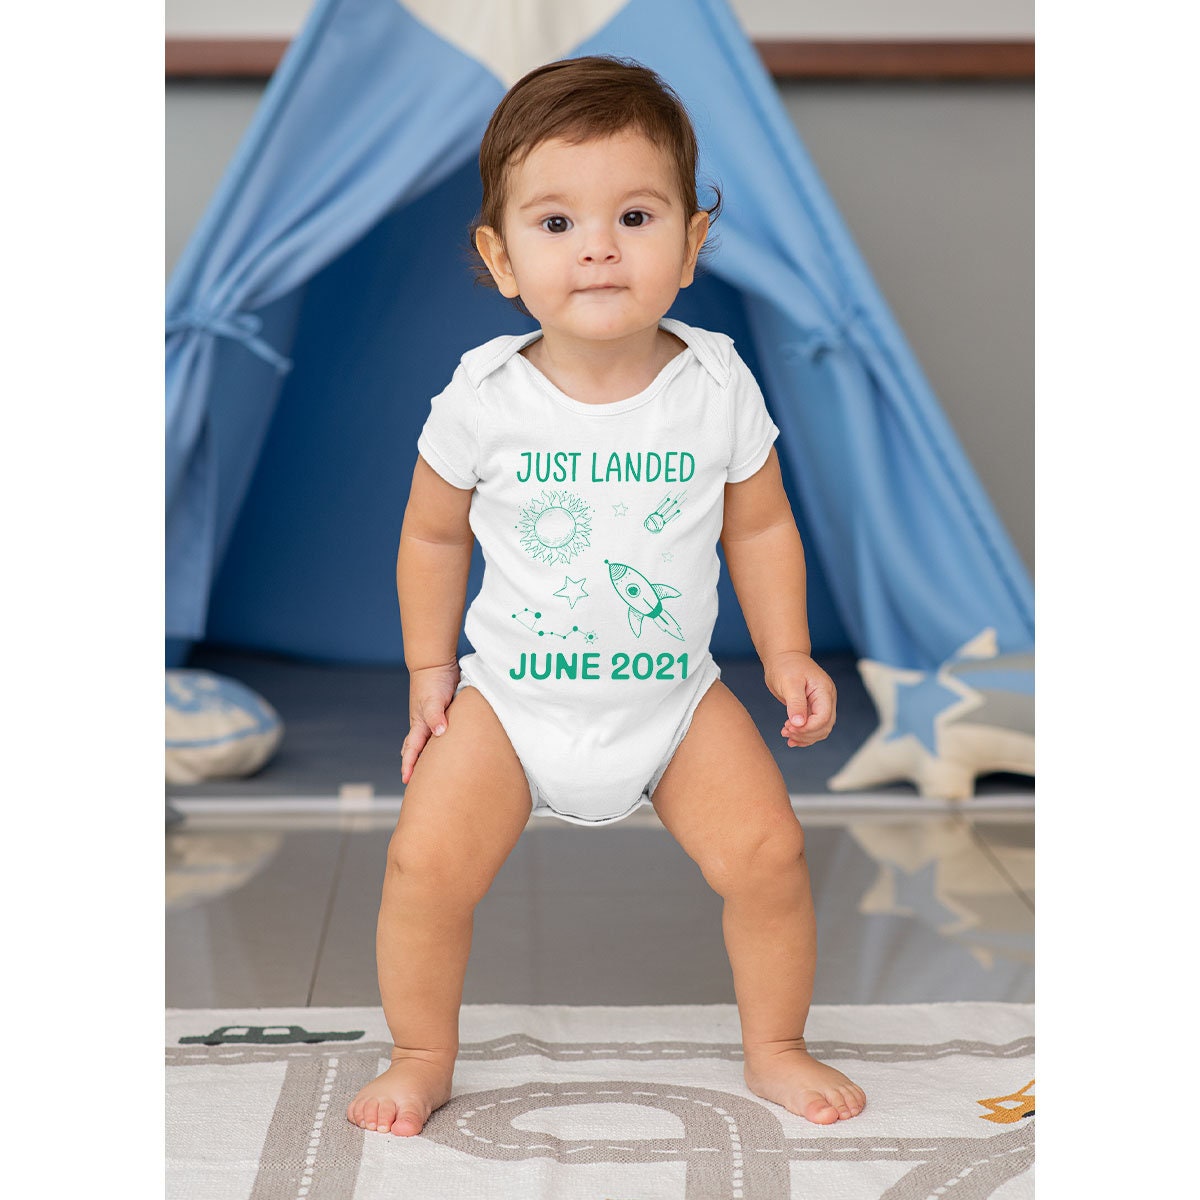 Funny Baby Onesie® Space Ship Baby Bodysuit Astronaut Baby Bodysuit Take Home Outfit Onesie® Cute Baby Onesie® Just Landed Baby Onesie®